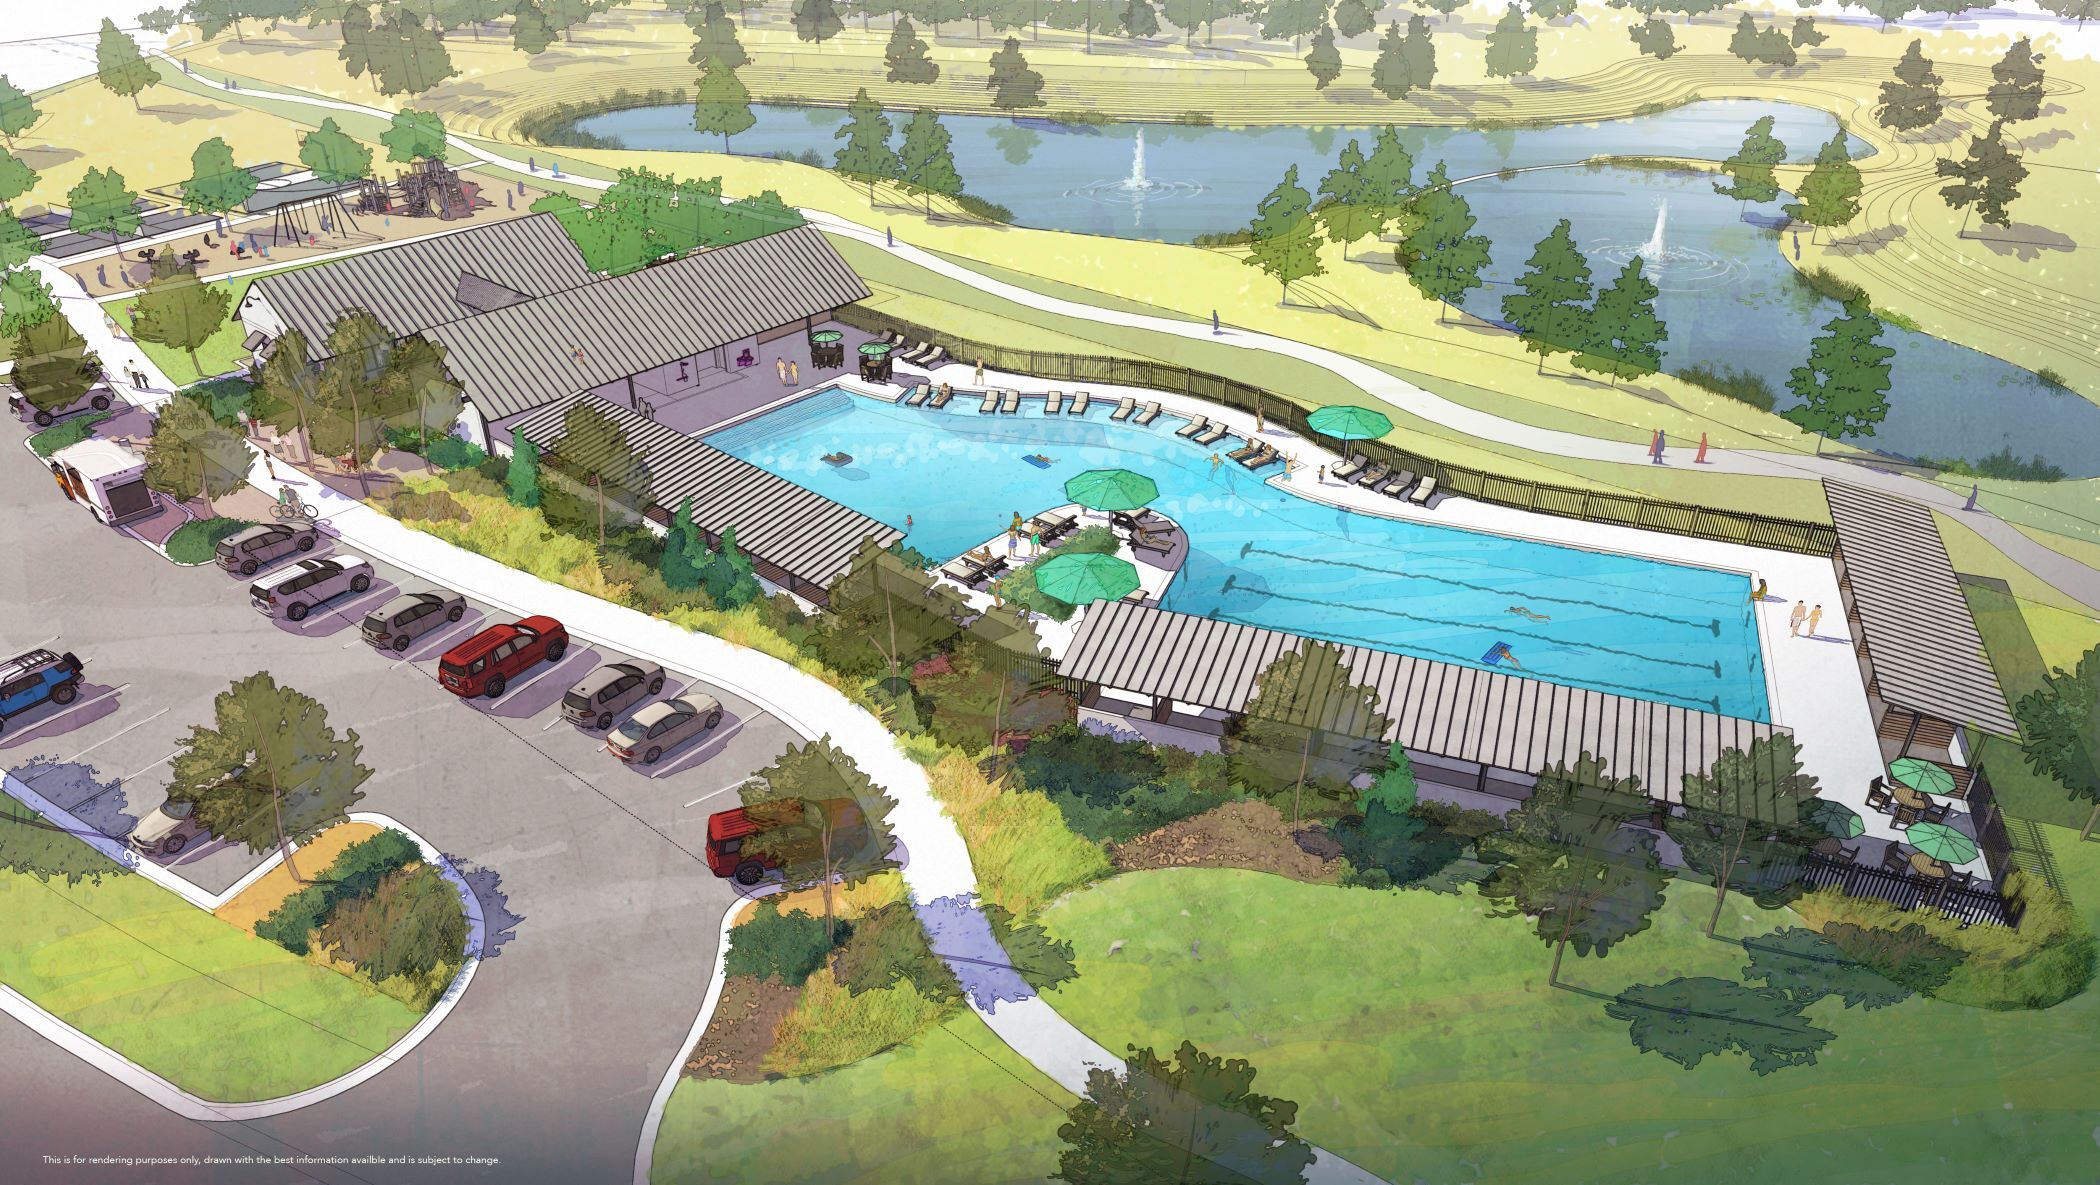 Adelton, a 348-acre mixed-use development planned for Bastrop, Texas, is expected to include 1,200 houses, 125,000 square feet of commercial use and several amenities, such as a large community pool area. (West Bastrop Village)